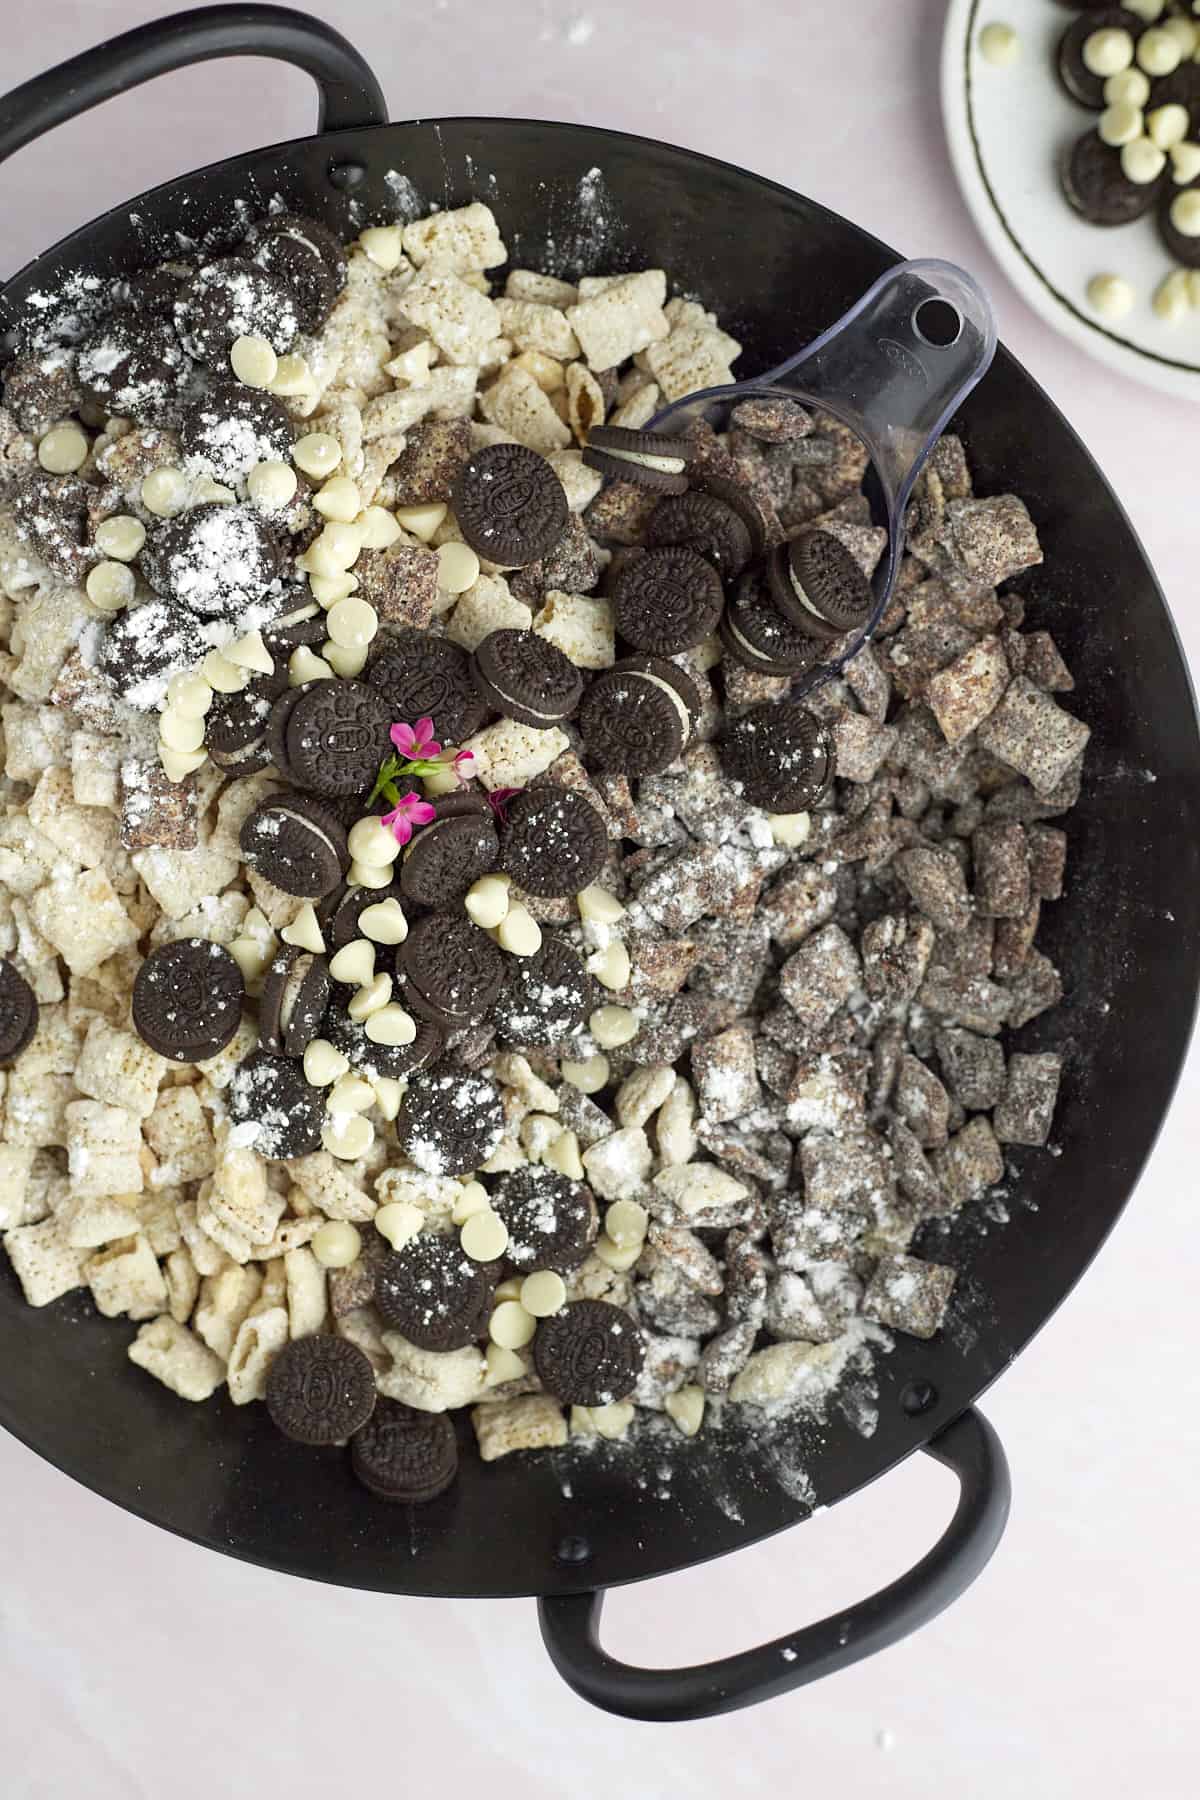 a skillet full of cookies and cream muddy buddies with mini Oreos and white chocolate chips